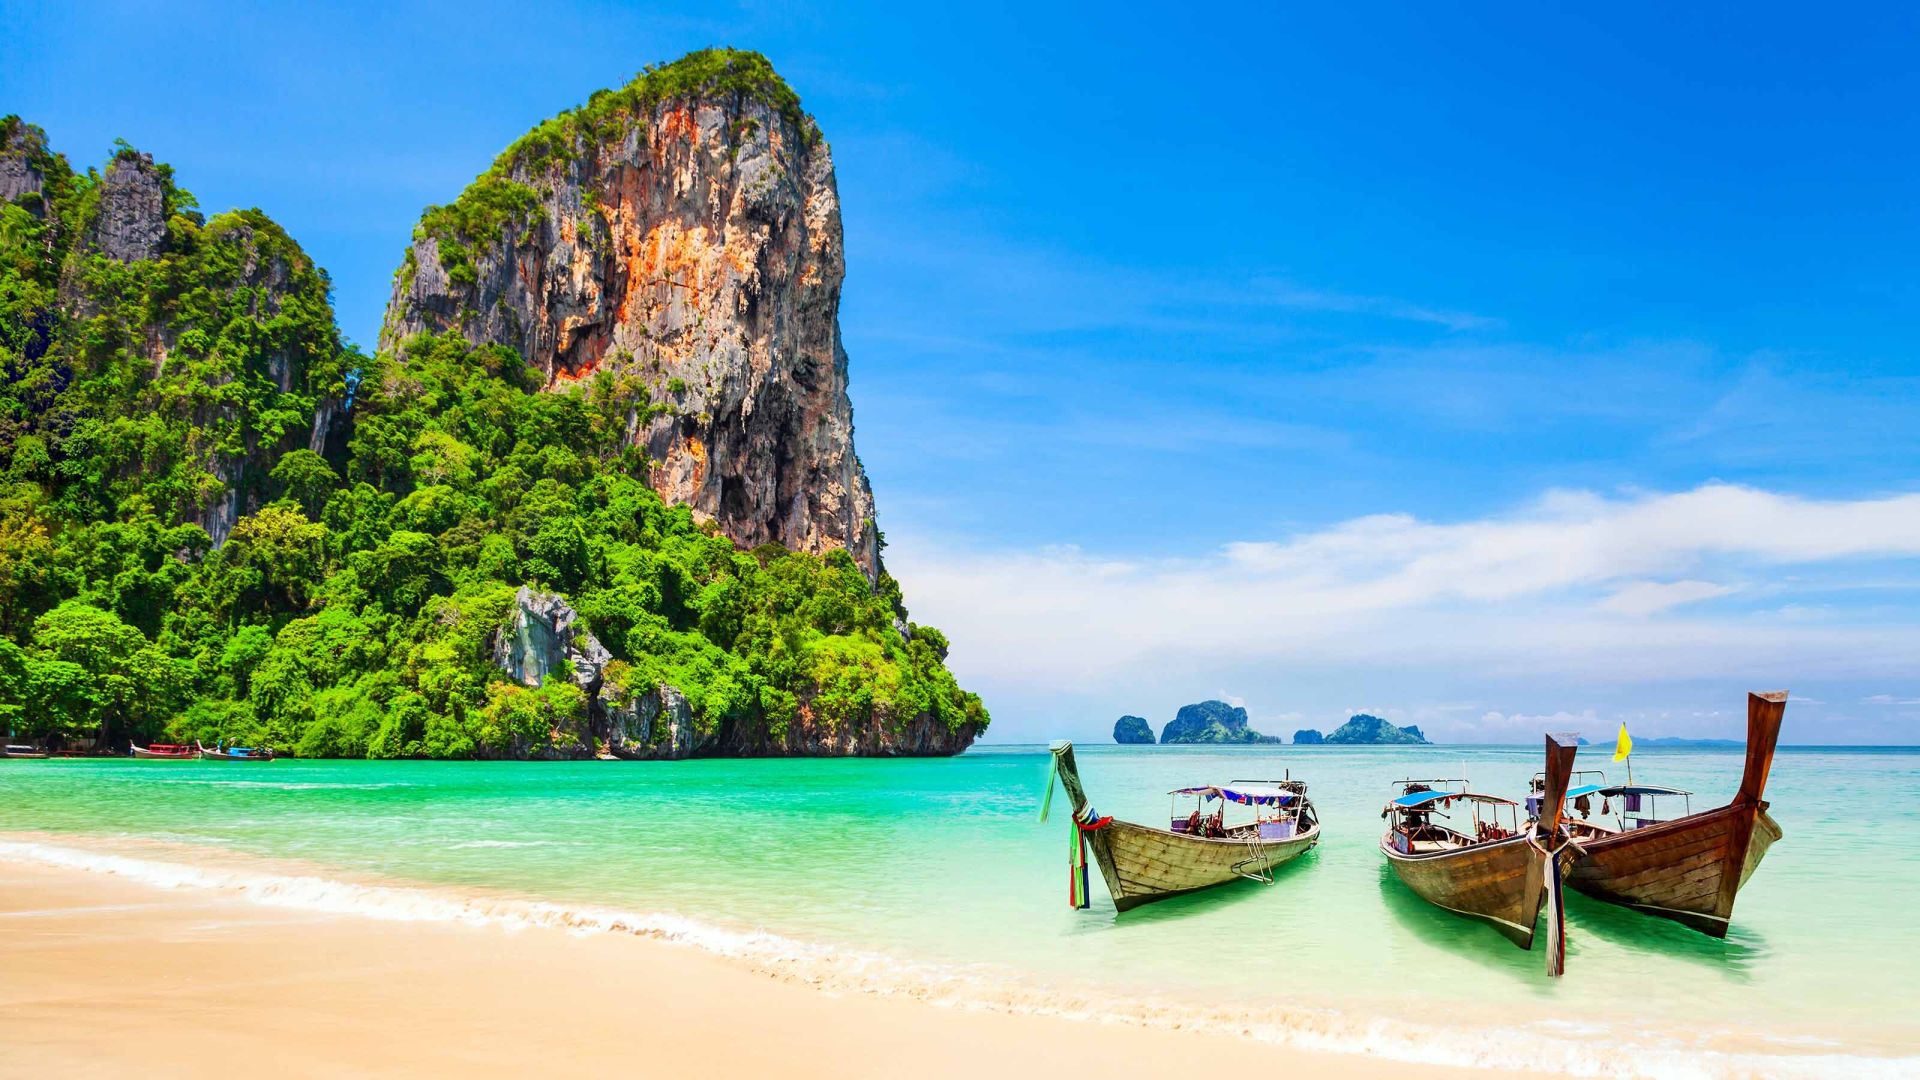 <p>                     <strong>Average daily cost: $52<br> Average accommodation cost: $21<br> Average daily meals cost: $14</strong>                   </p>                                      <p>                     Flights to this south Asian country can be expensive, but other costs make up for it. Known for its tropical beaches, jungle temples, Buddha statues, and the delicious restaurants and street markets in the bustling city of Bangkok, it's no wonder Thailand is the most visited country in Southeast Asia.                   </p>